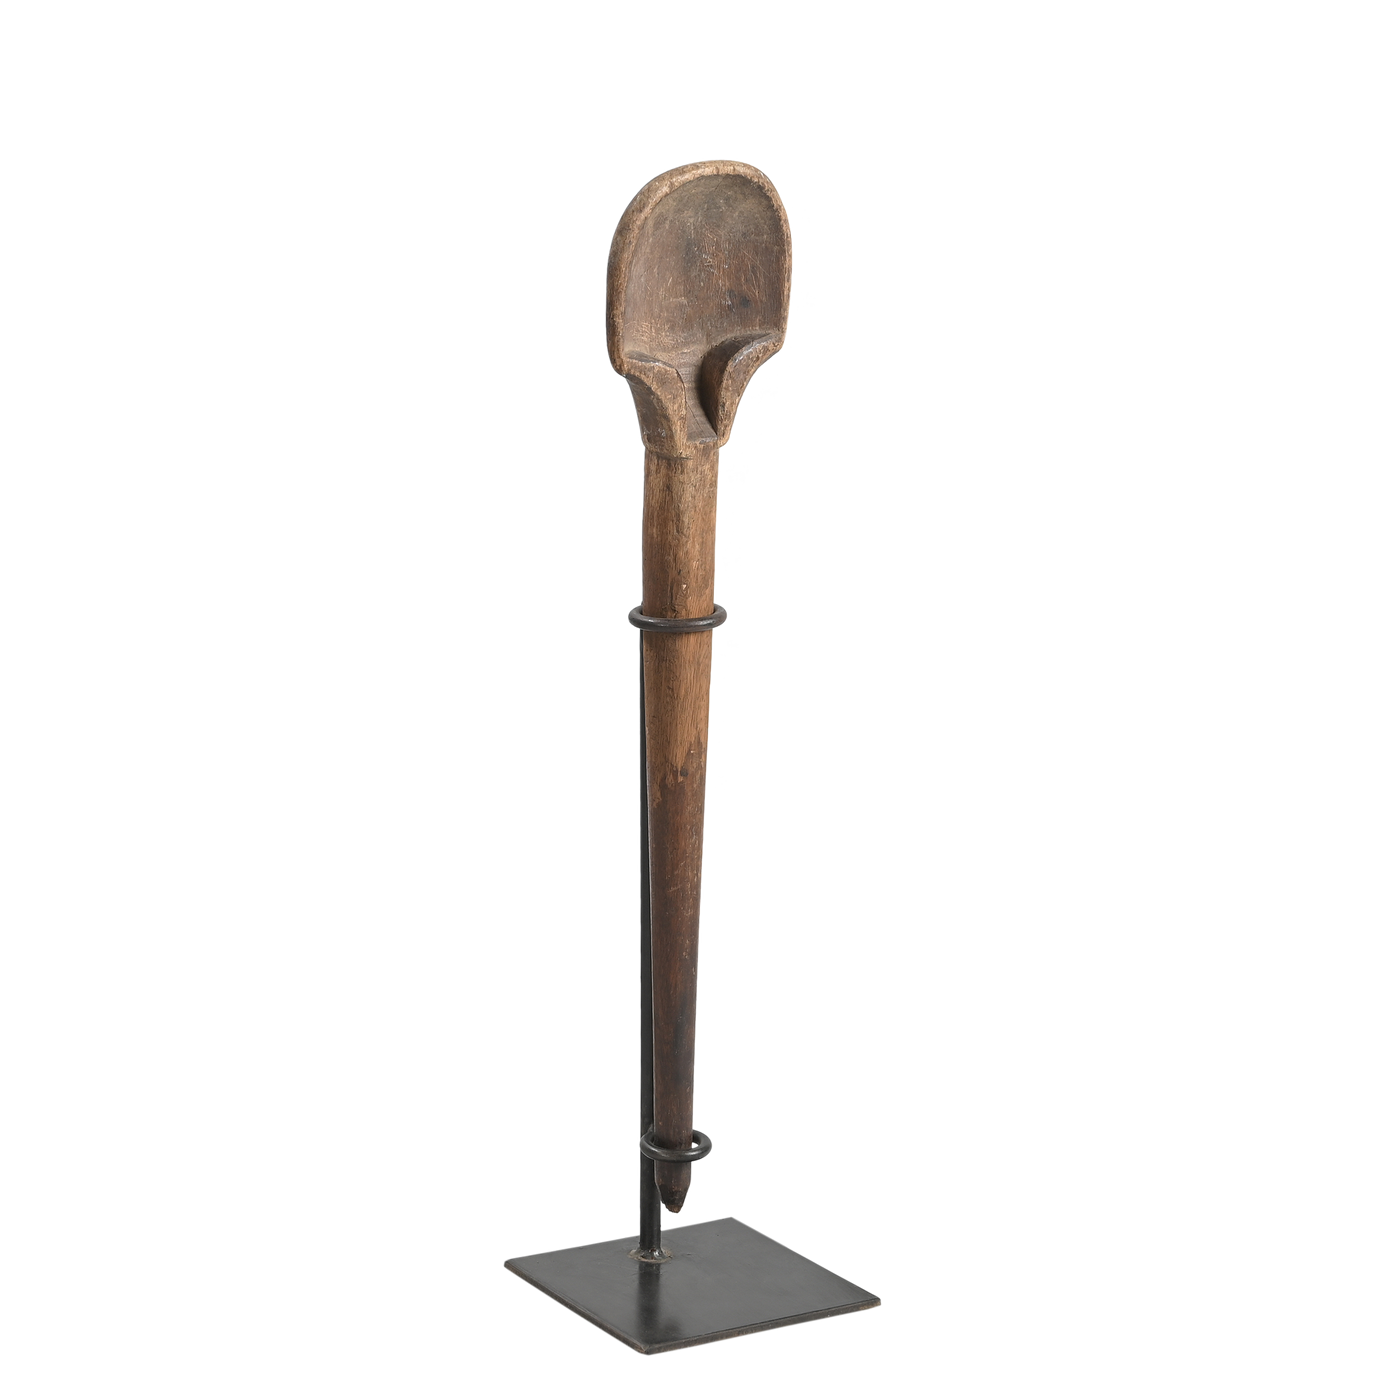 Chamach - Large wooden spoon n°15